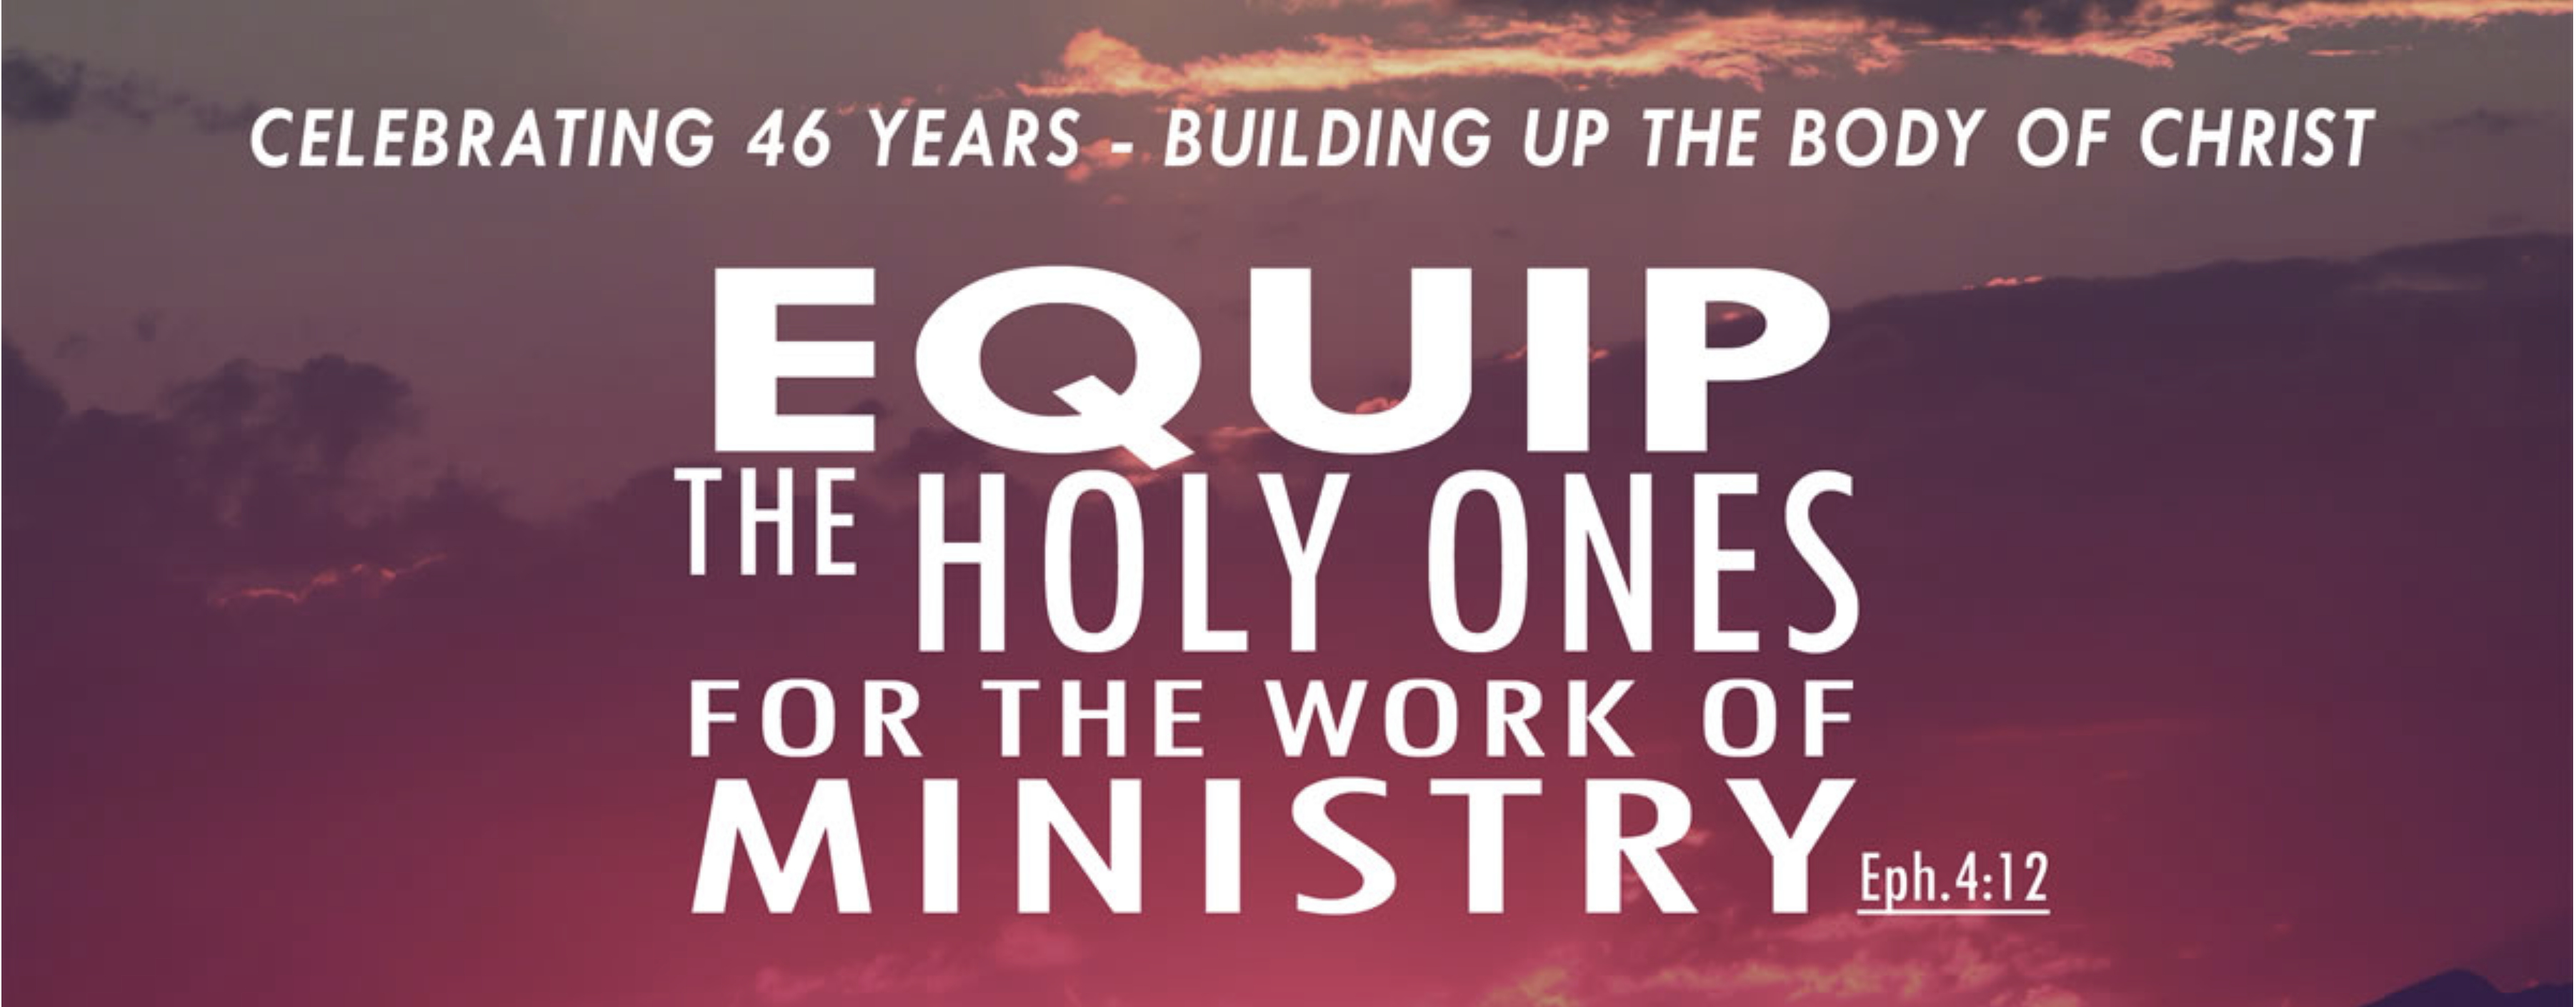 Equip the Holy Ones for the Work of Ministry